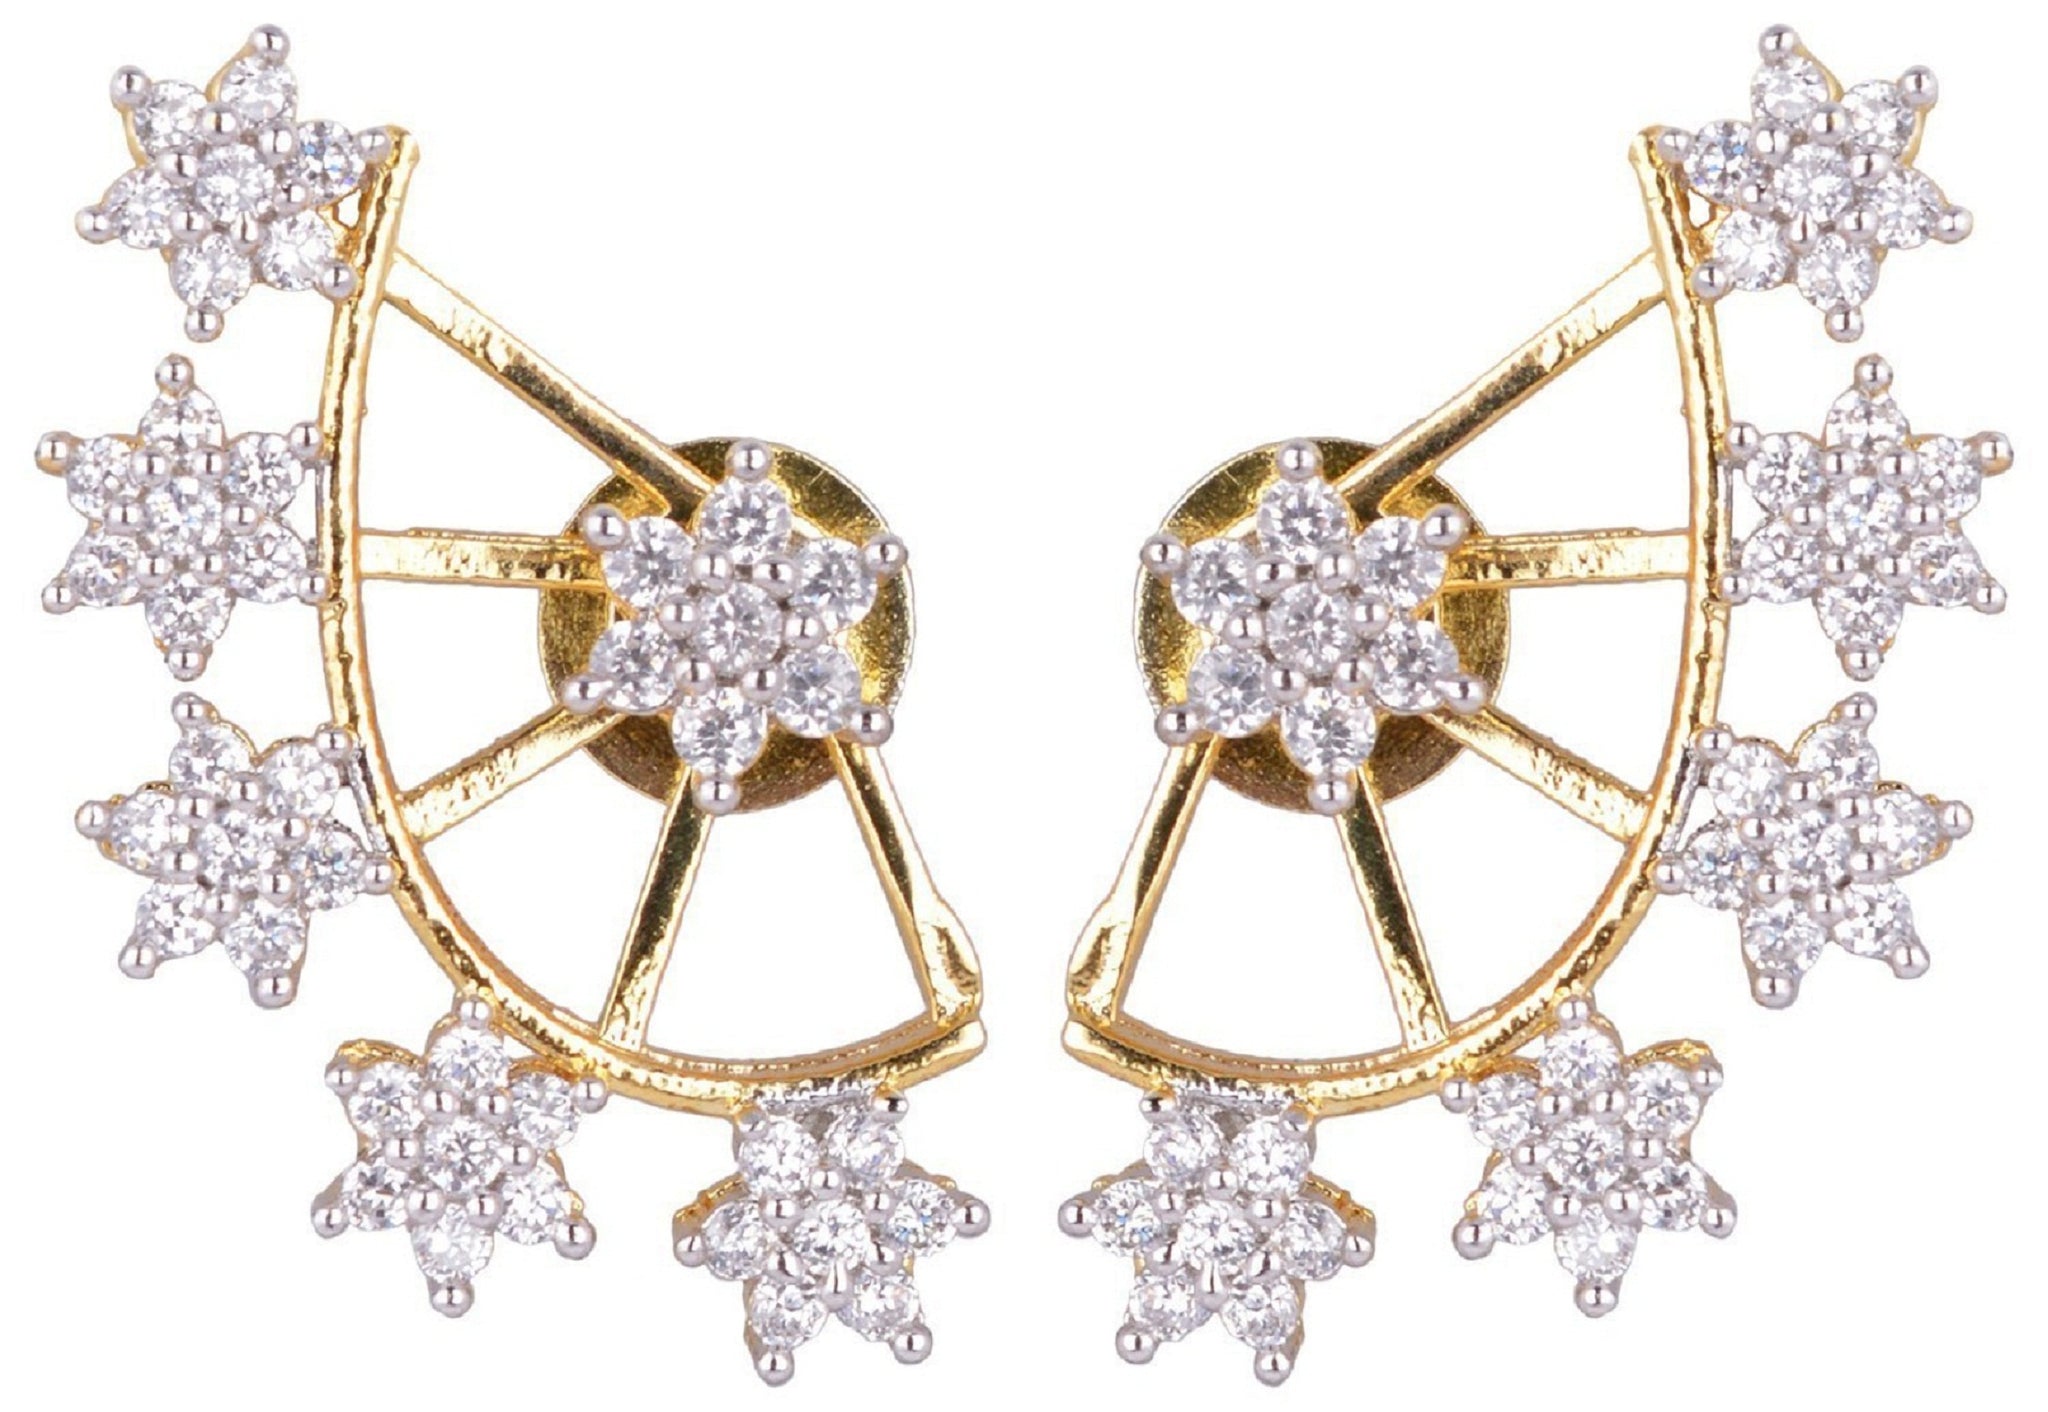 Attractive Golden Plated Star Shape American Diamond Studd Earring Set for Women and Girls